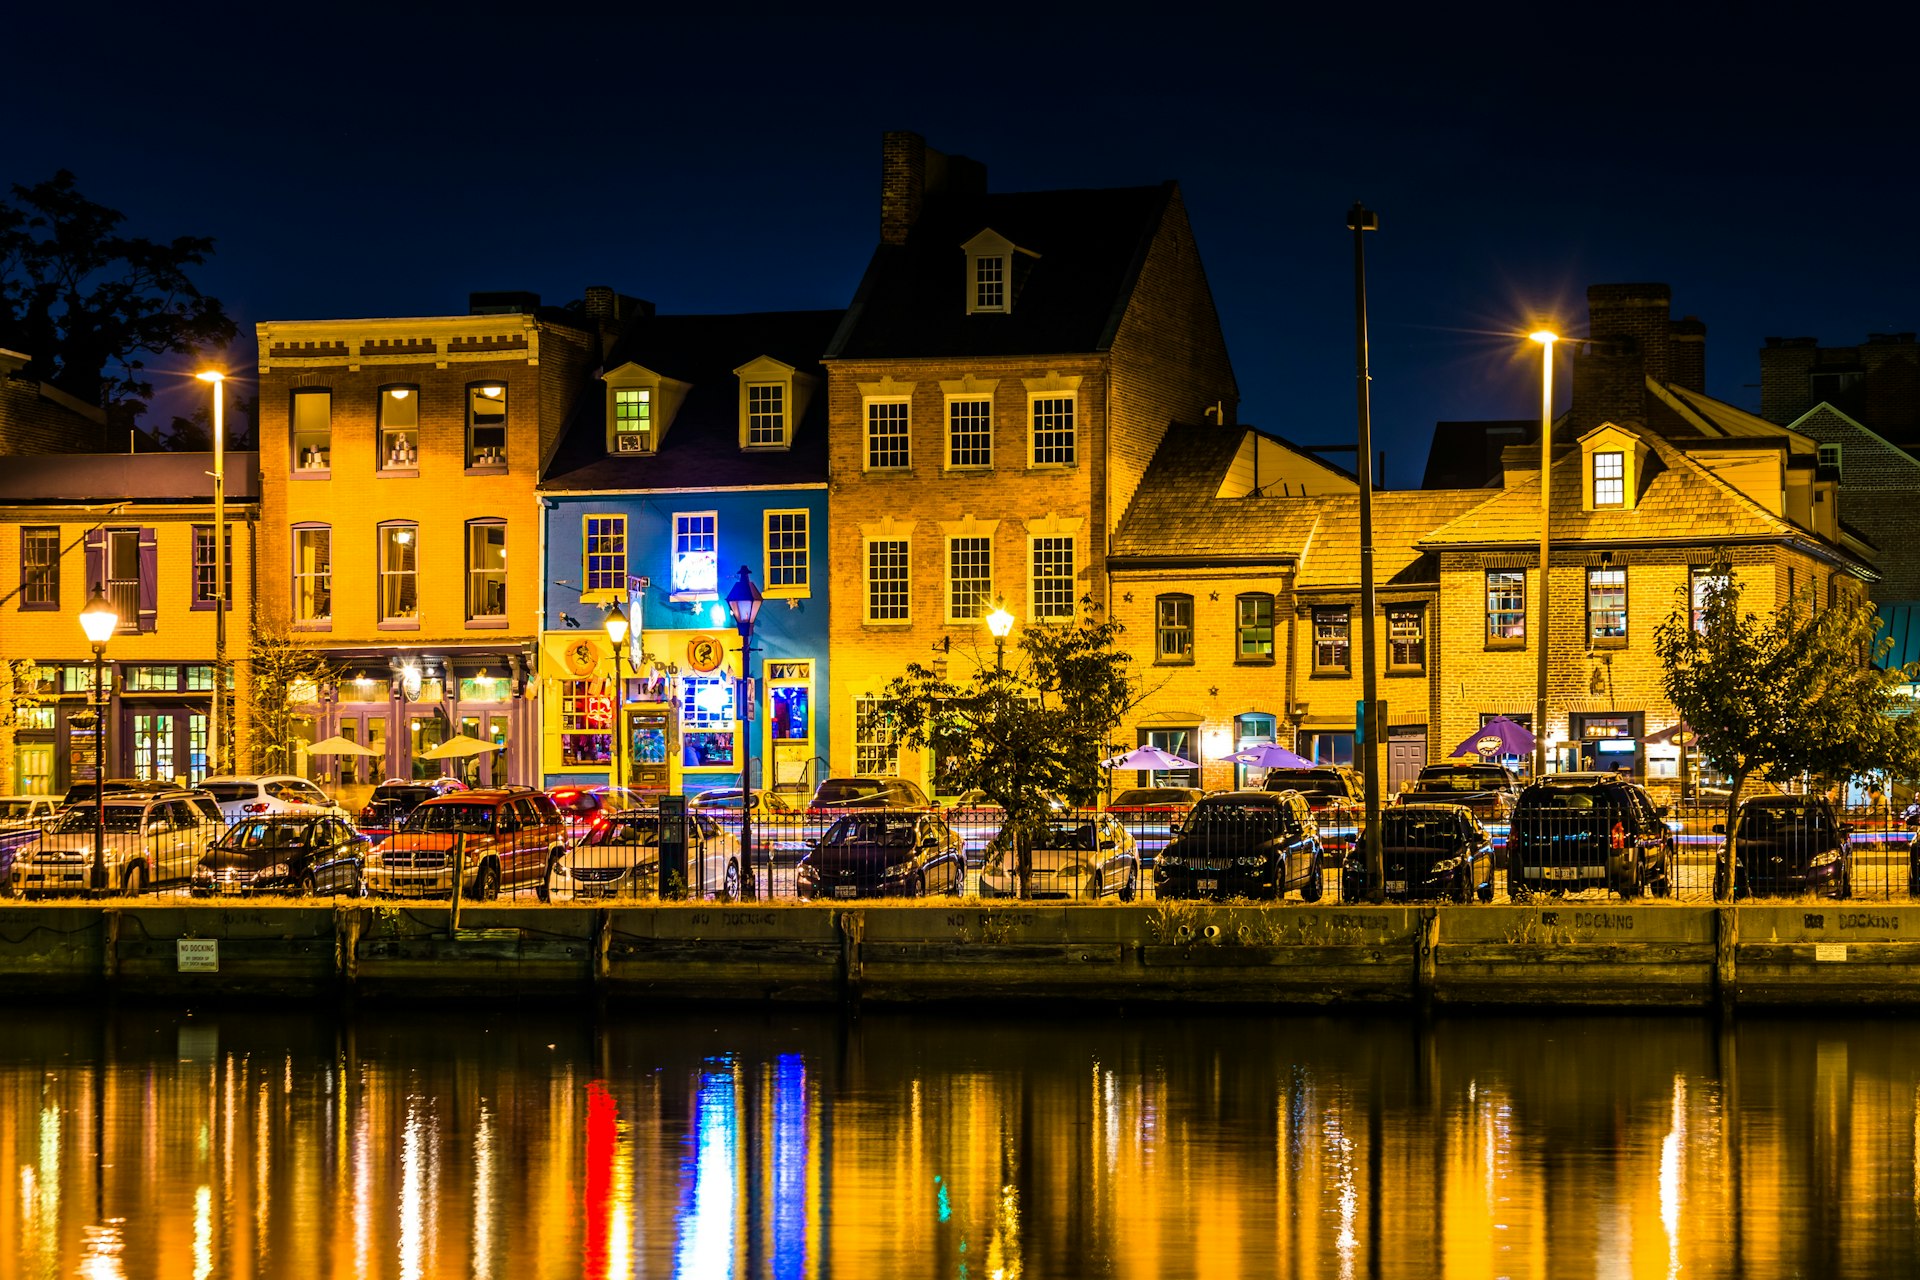 Shops and restaurants along the harbor at night in Fells Point, Baltimore, Maryland, USA